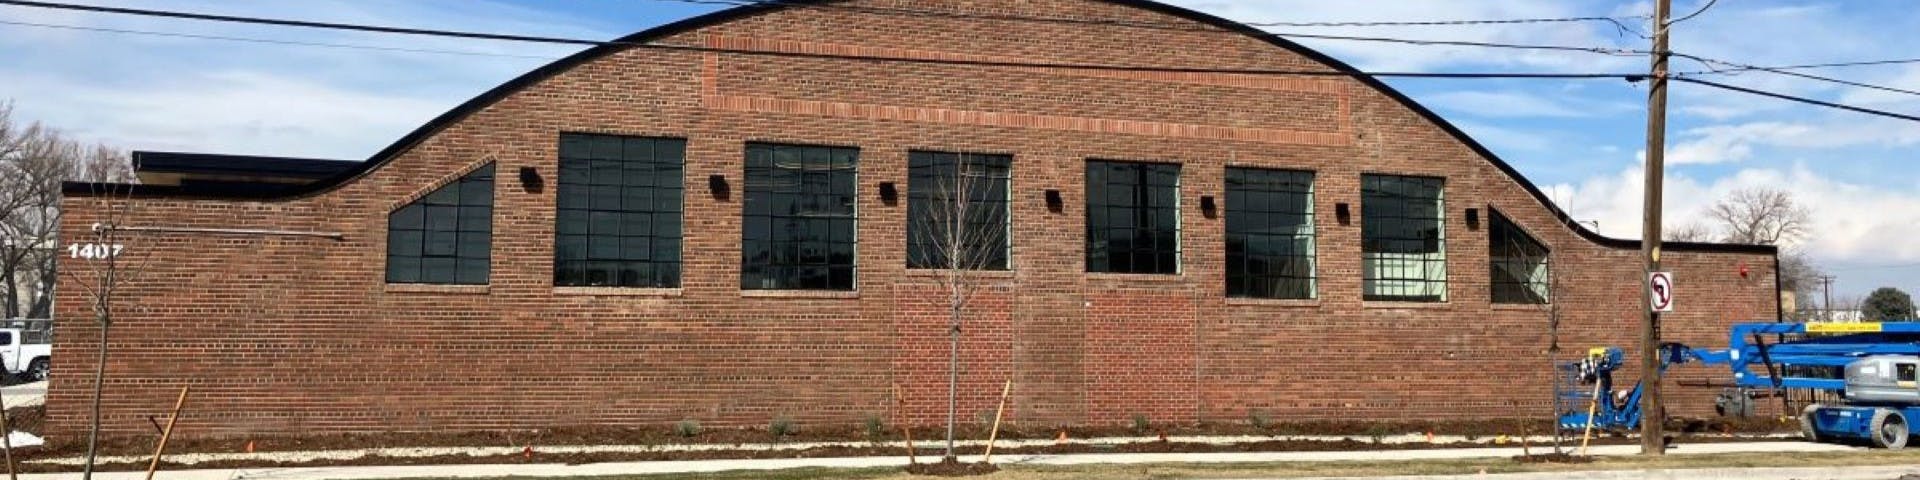 south side of old Warnoco building showing windows along the facade